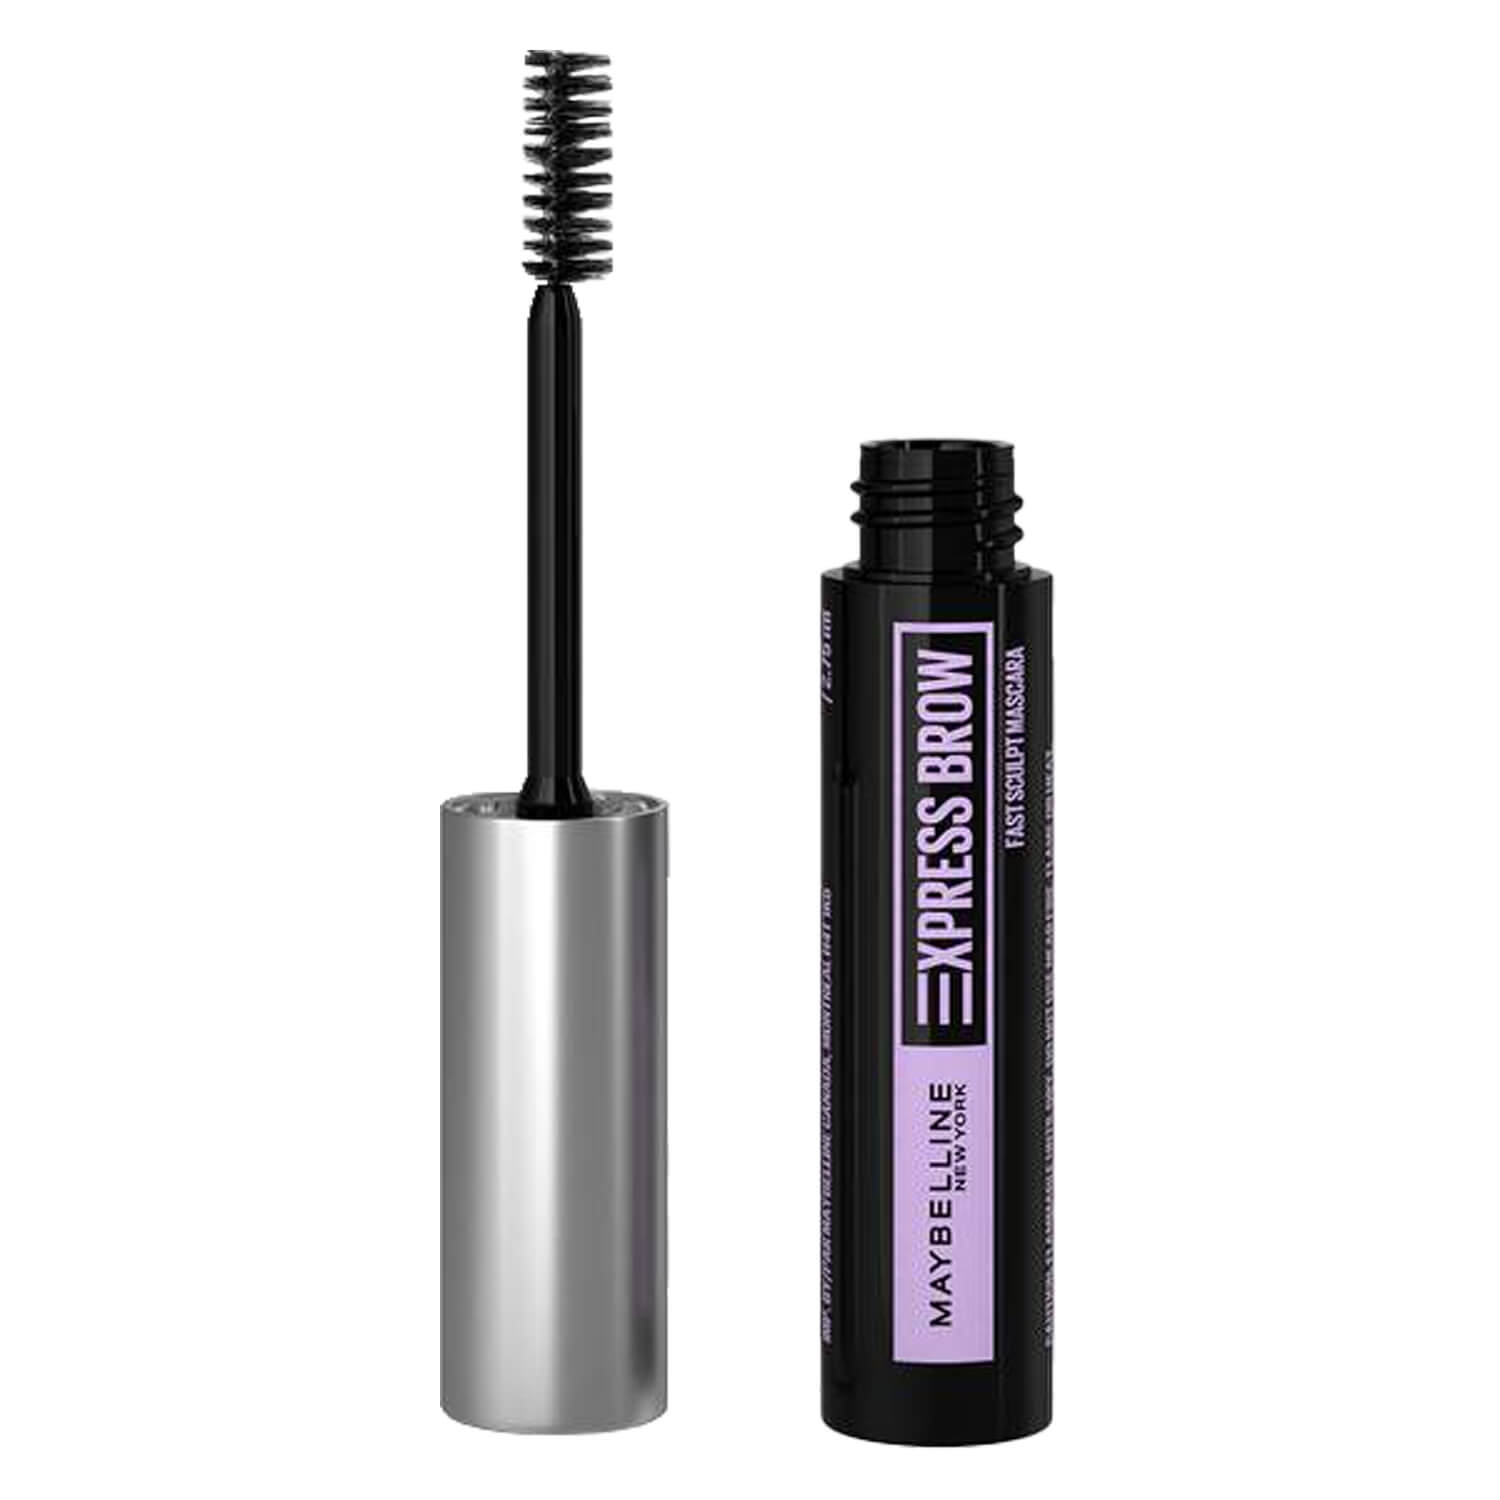 Produktbild von Maybelline NY Brows - Express Brow Fast Sculpt Mascara 10 Clear